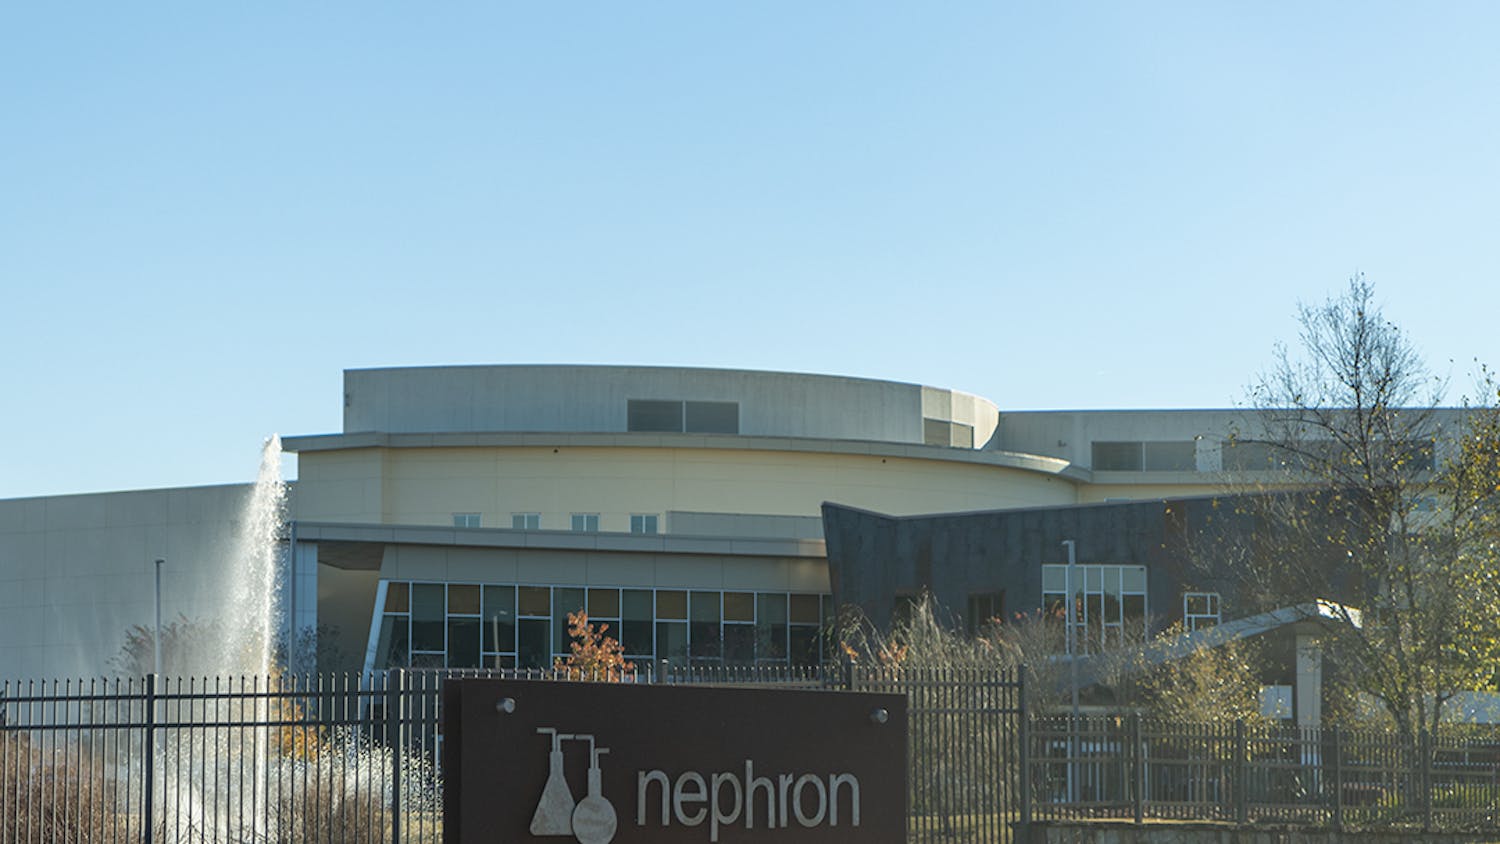 The Nephron Pharmaceuticals Corporation headquarters is located off 12th Street Extension in West Columbia, South Carolina.